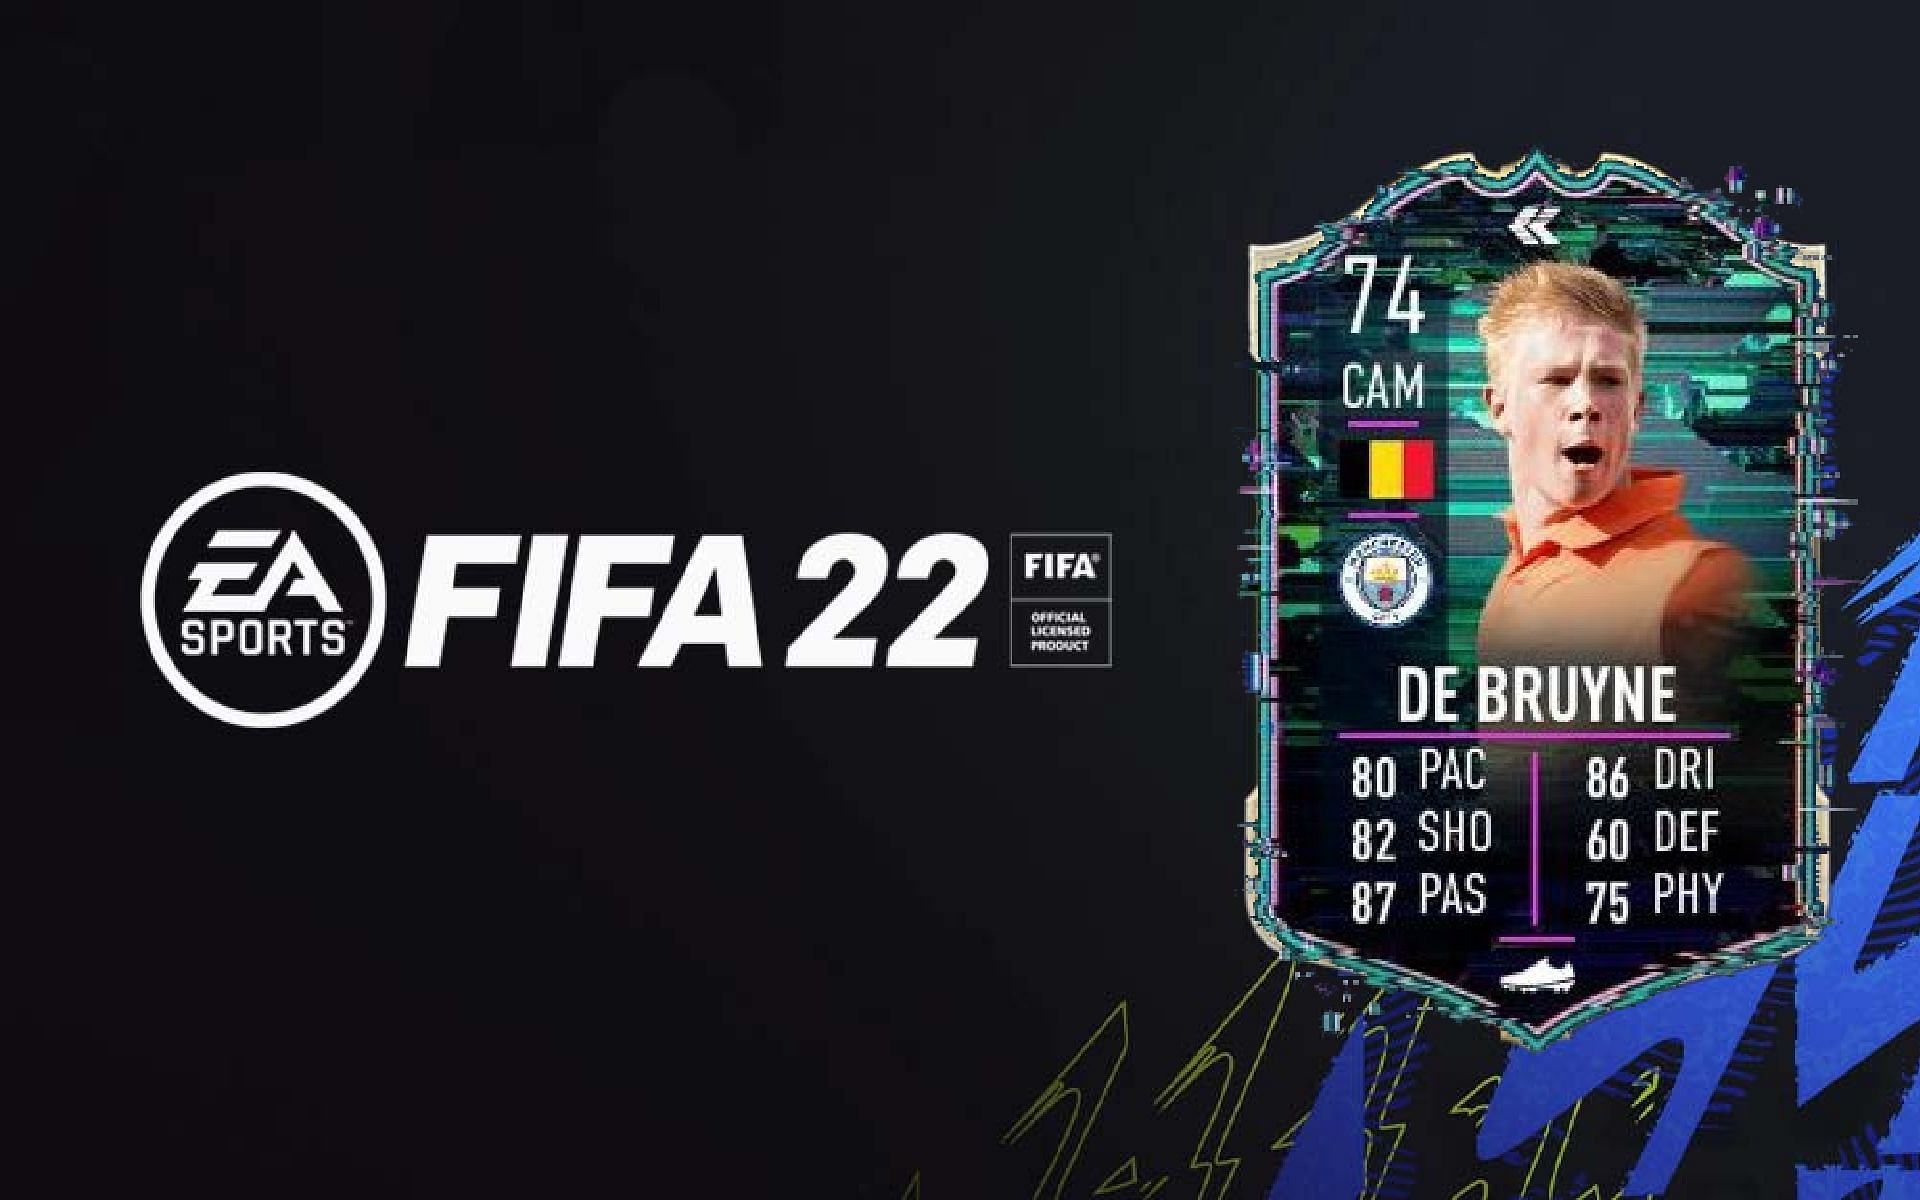 FIFA 22 Ultimate Team: How to complete Kevin De Bruyne Flashback SBC in FUT 22